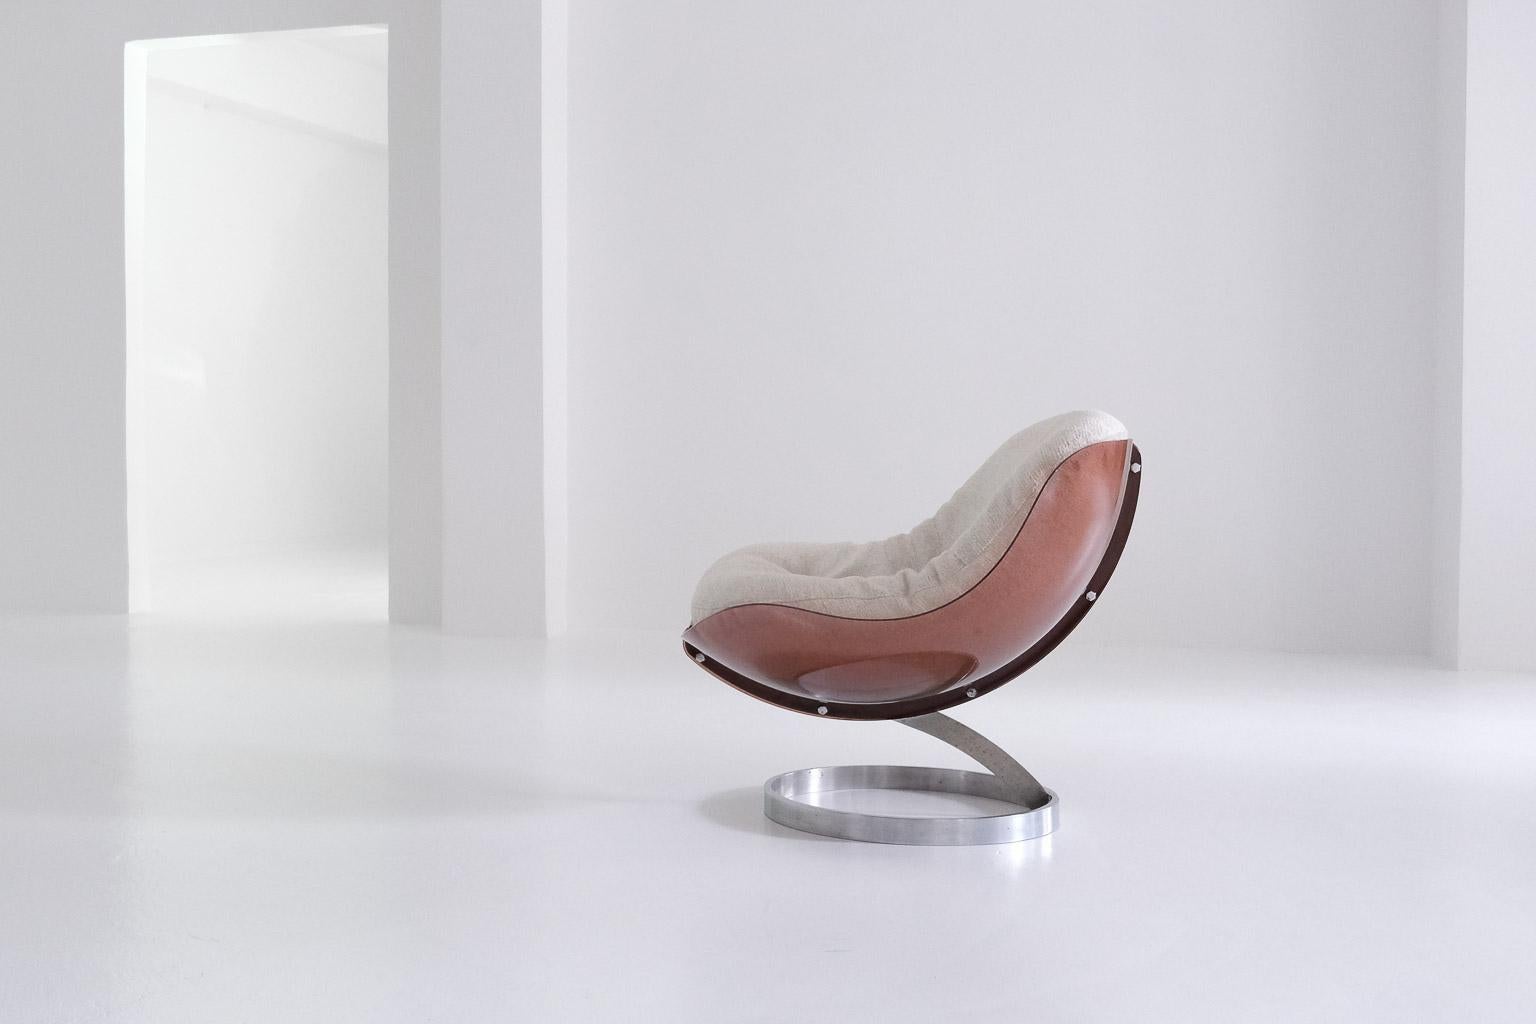 space age and the race to the moon had a strong influence on global culture: from architecture to film, from fashion to furniture. interior design became increasingly experimental: eero aarnio designed his spectacular ‚ball chair‘ in 1963, joe